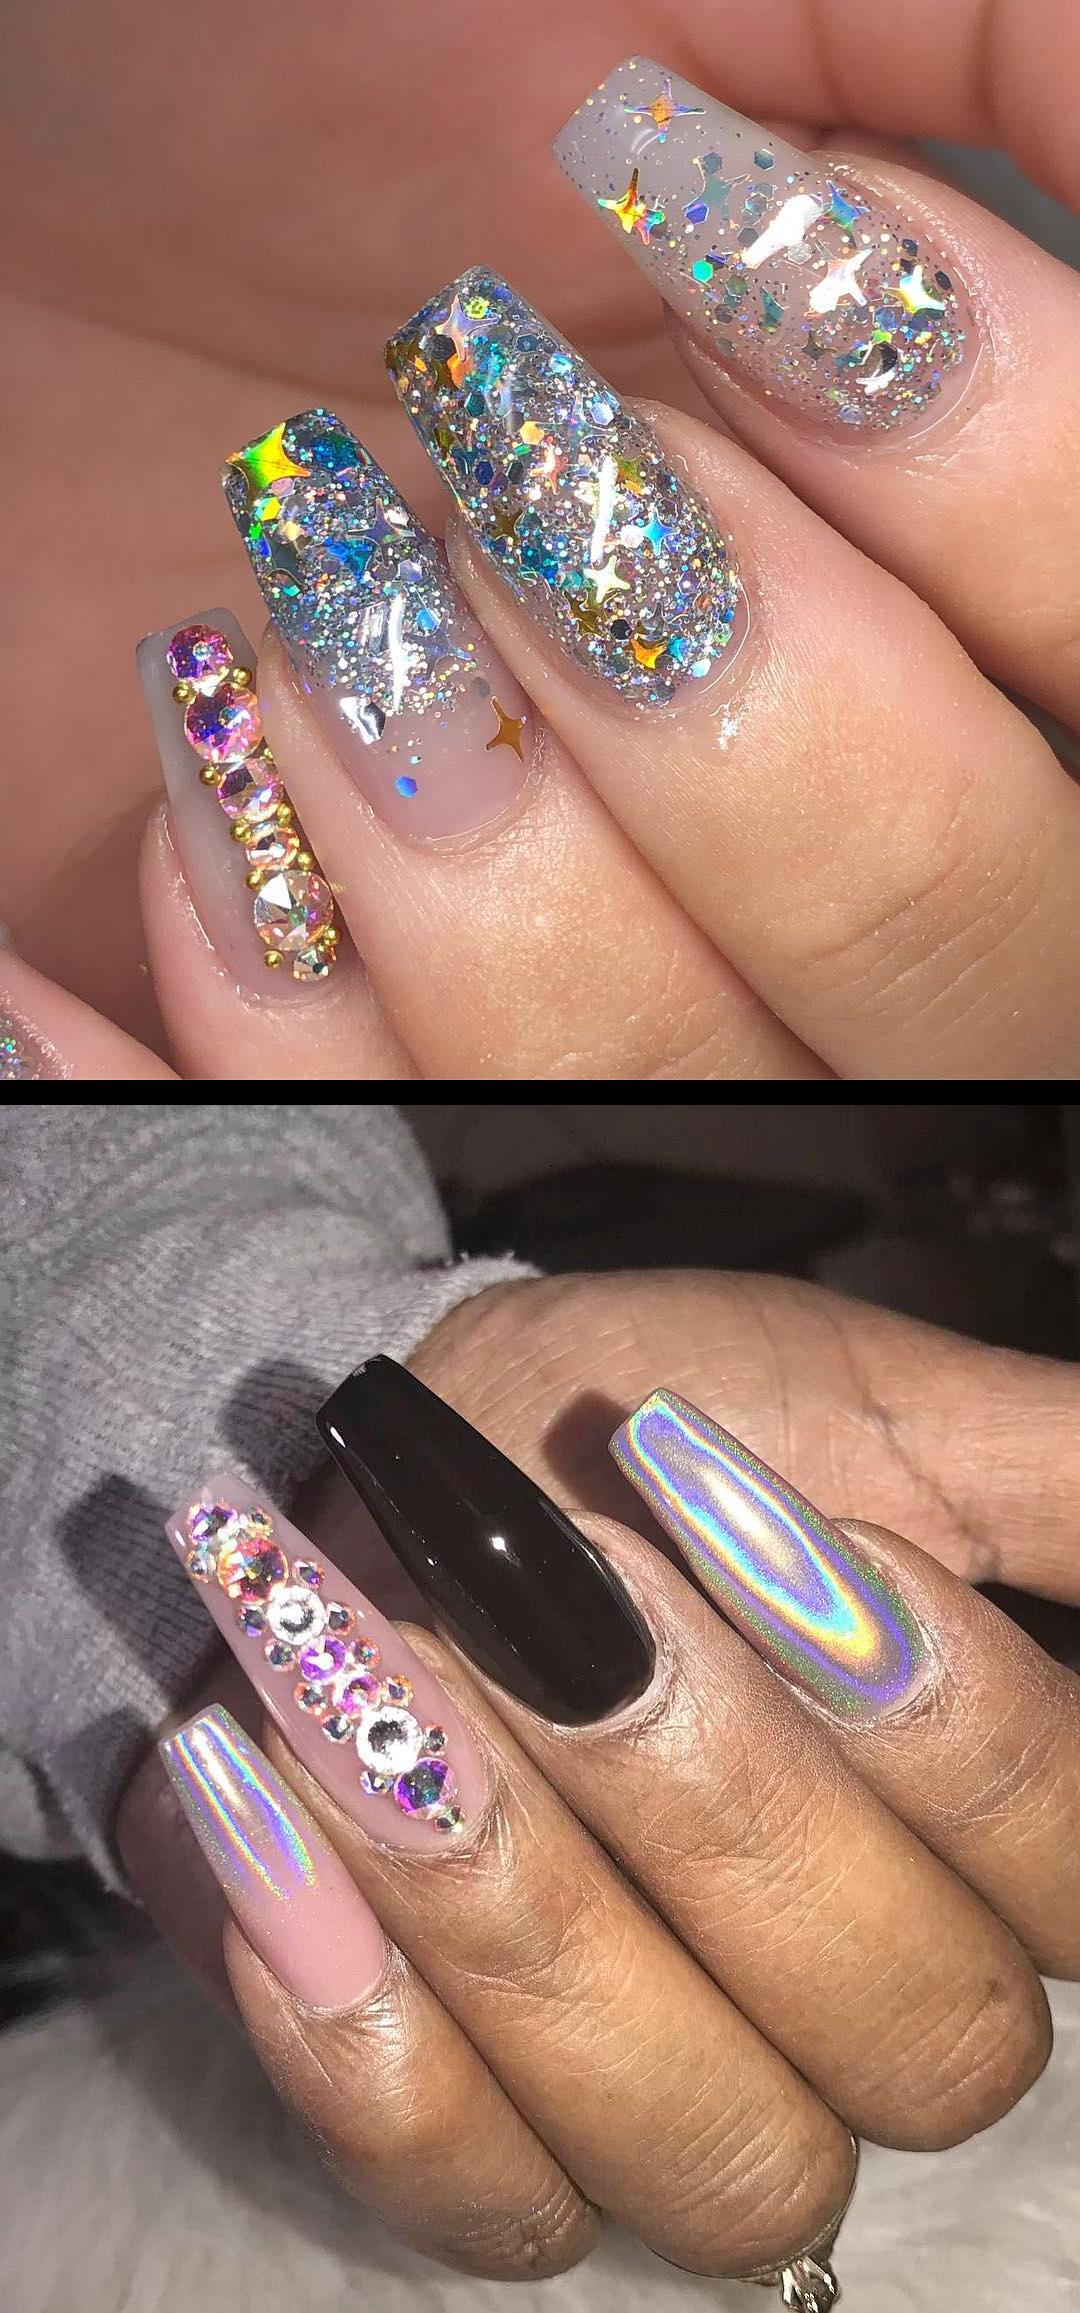 maniology,uv light for nails,Wishing stars From dulcenailsprinkles  Use my code for 15% off your next order over $25!! (excluding Swarovski) , nopolish , allacrylic , kreationsbykiki , nails , ncnails , raleighnails , durhamnails , glitter , glitternails , tumblr , nailsofinstagram , nailsoftheday , nailpro , fashion , nailart , nailtutorial , bgdn , blackgirlsdonails , blacknailtechs , naillife , nailsmagazine , tumblrfeature , dulcenailsprinkles bnaturallynawlins comes all the way from VA to come see me warms my heart lol , nopolish , allacrylic , kreationsbykiki , nails , ncnails , raleighnails , durhamnails , glitter , glitternails , tumblr , nailsofinstagram , nailsoftheday , nailpro , fashion , nailart , nailtutorial , bgdn , blackgirlsdonails , blacknailtechs , naillife , nailsmagazine , tumblrfeature 